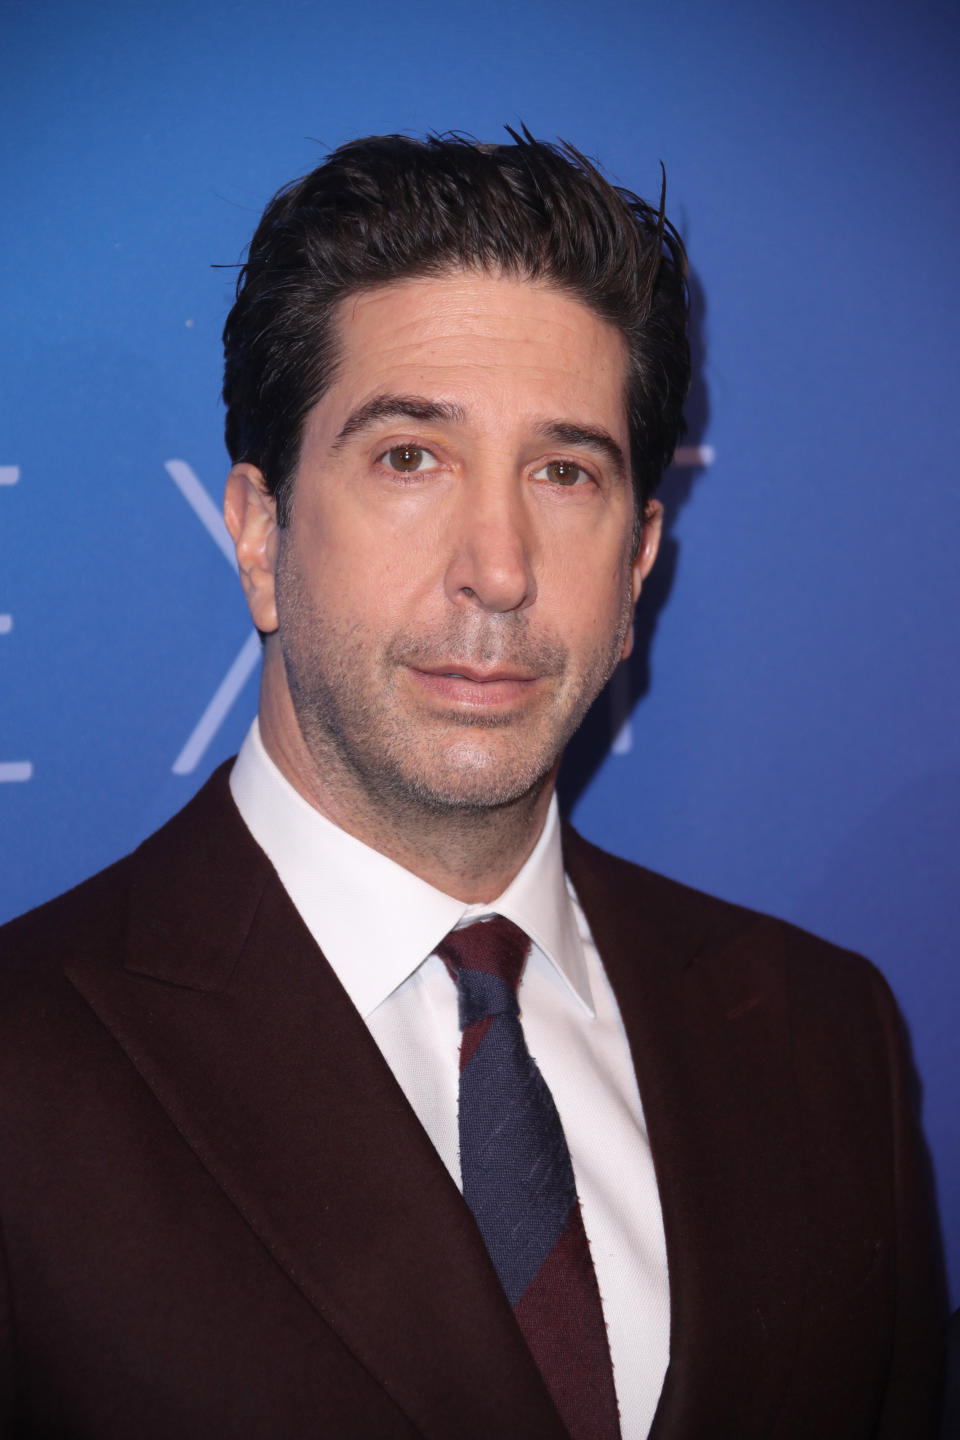 David Schwimmer attends the Sky Up Next 2020 at Tate Modern on February 12, 2020 in London, England. (Photo by Mike Marsland/WireImage)